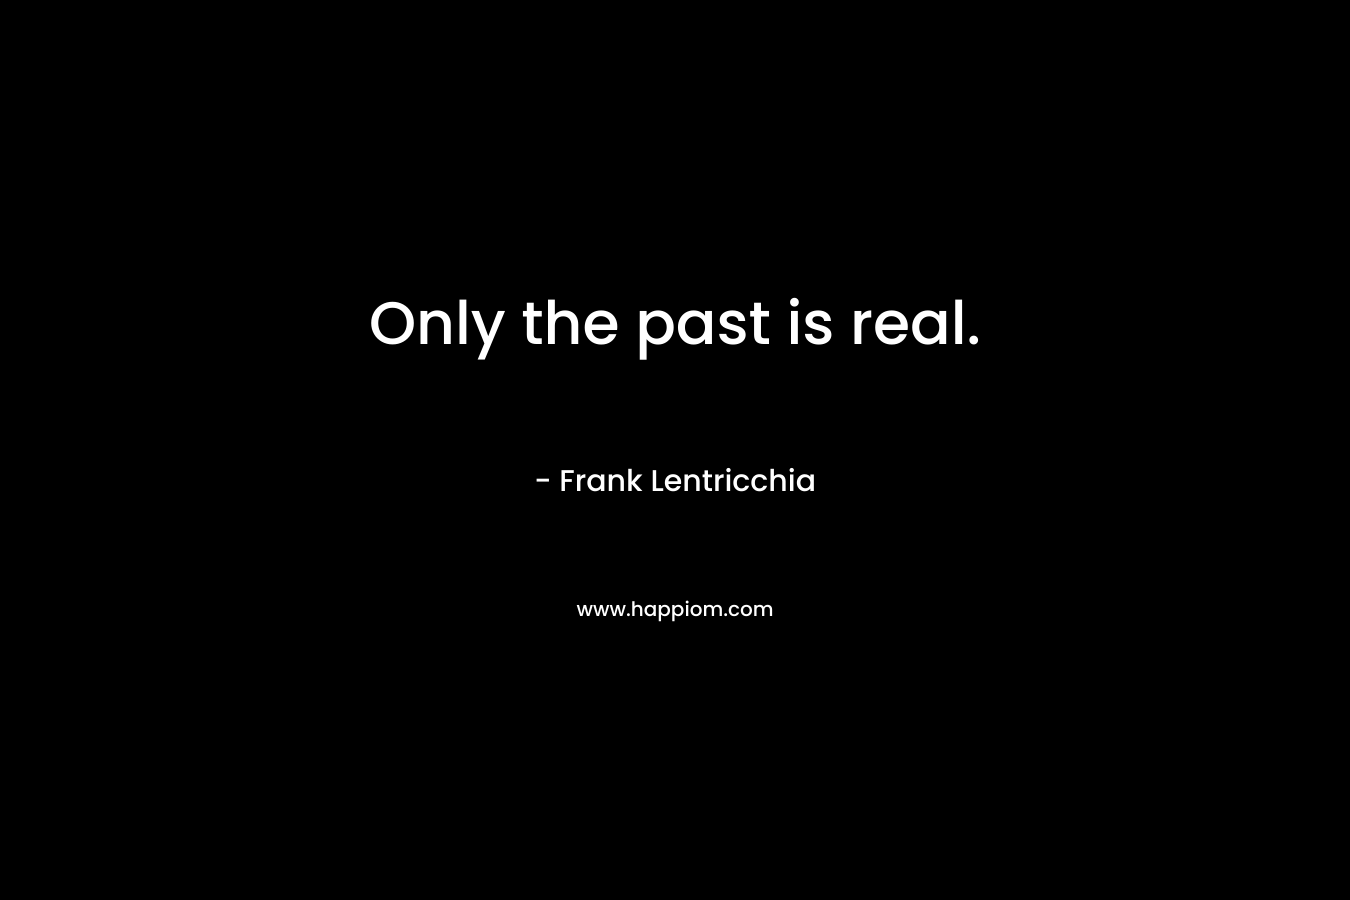 Only the past is real. – Frank Lentricchia